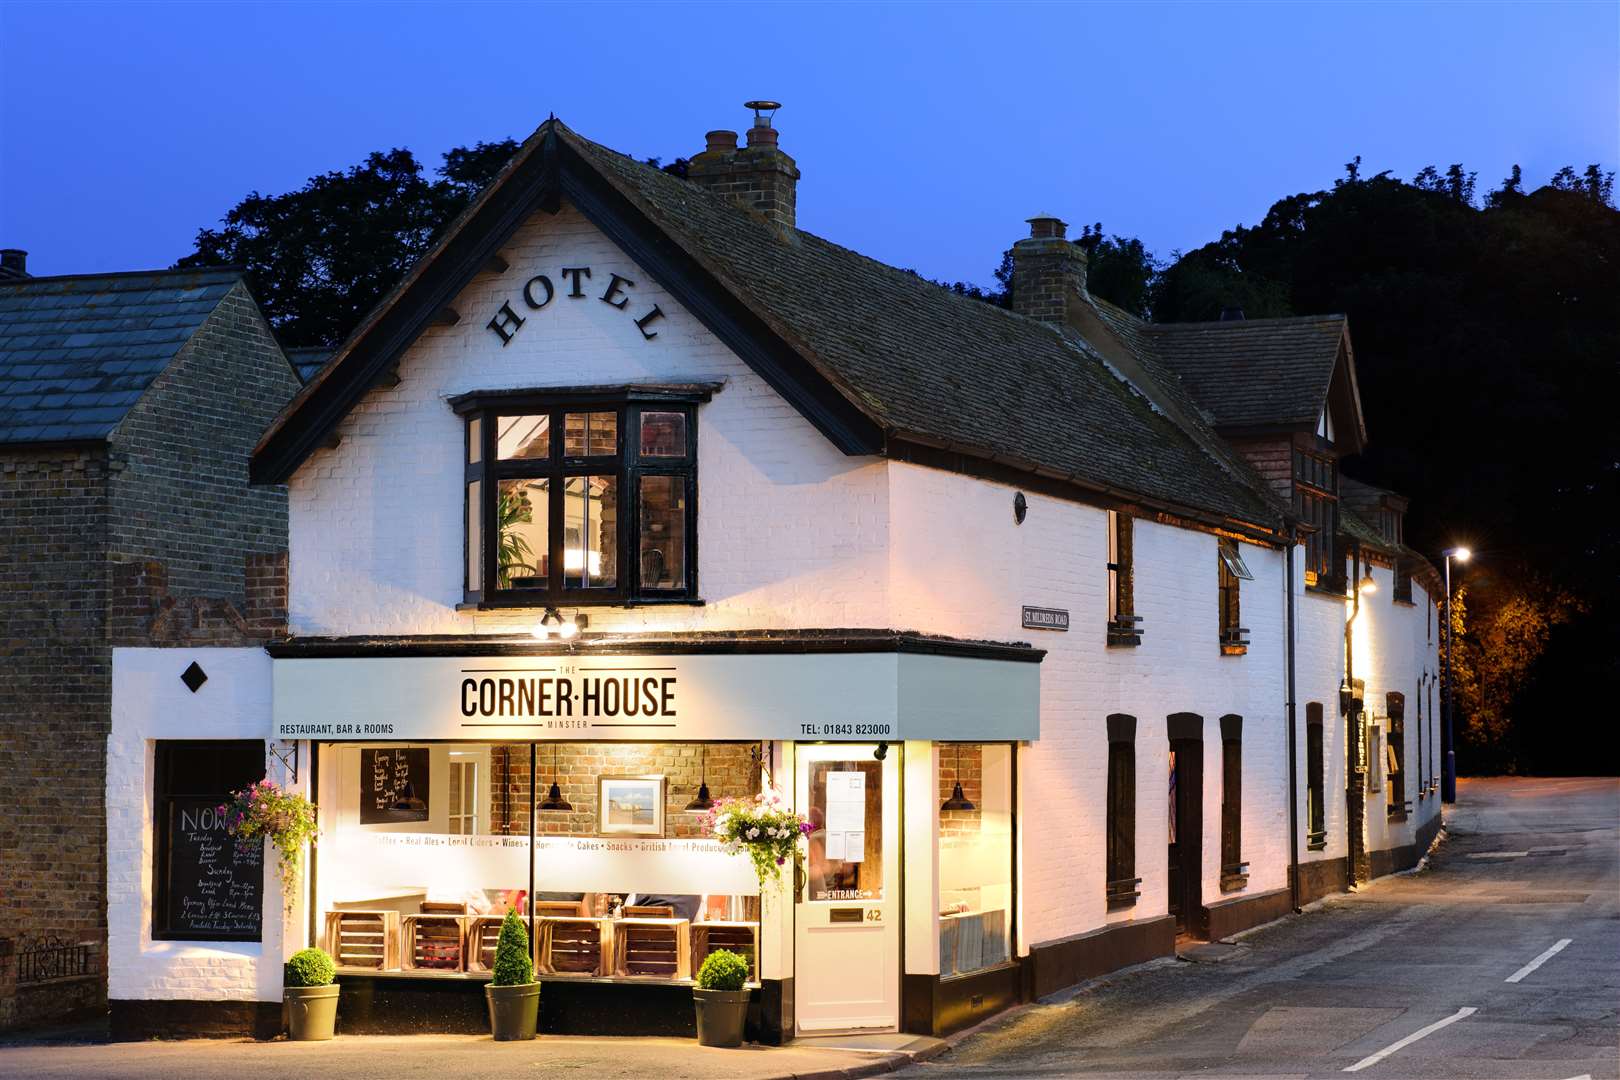 The Corner House in Minster is set to close down next month